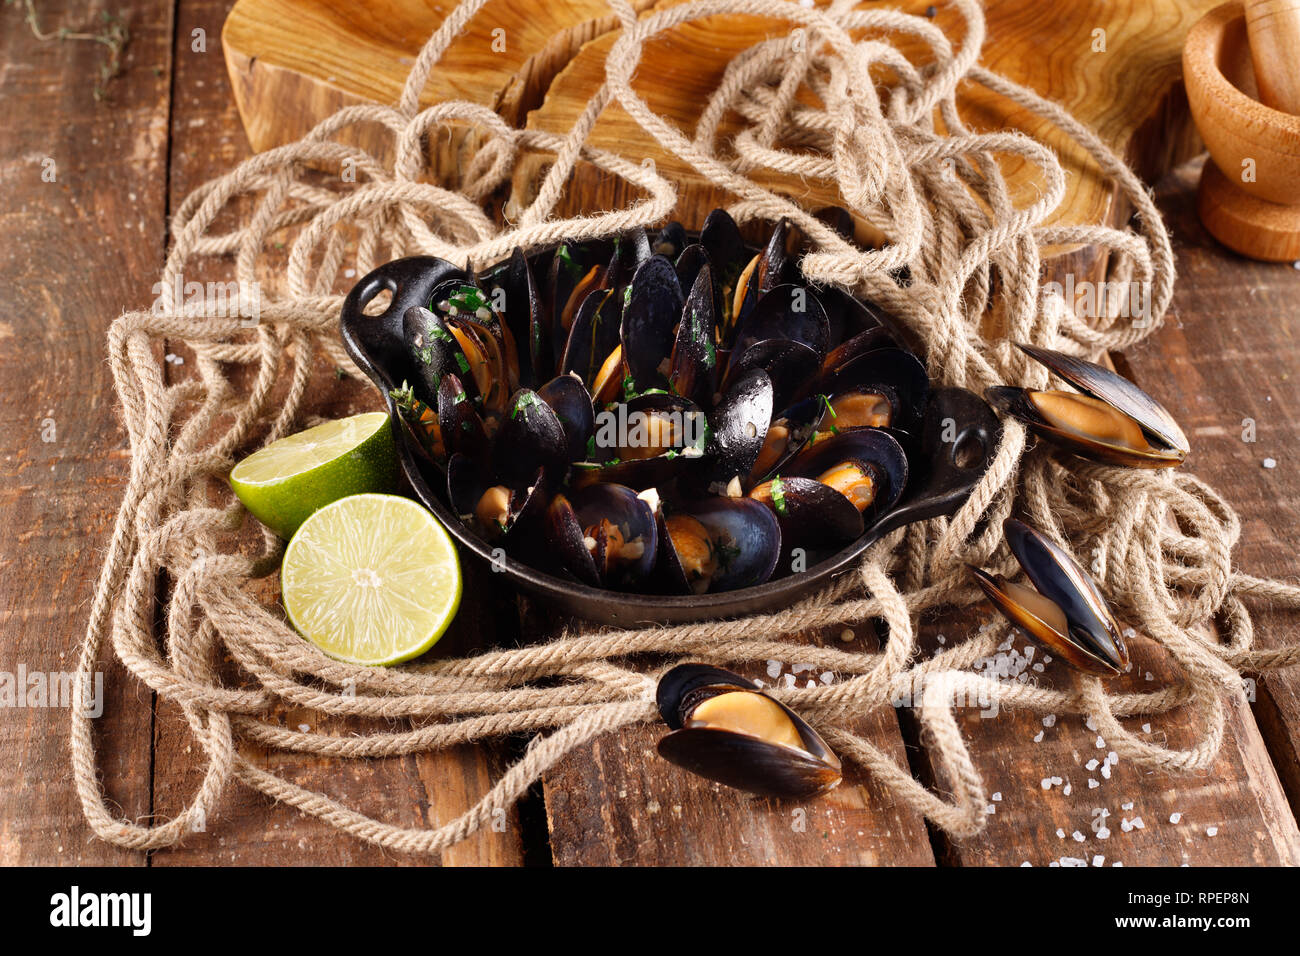 Boiled mussels in copper dish for cooking on wooden background close-up Stock Photo